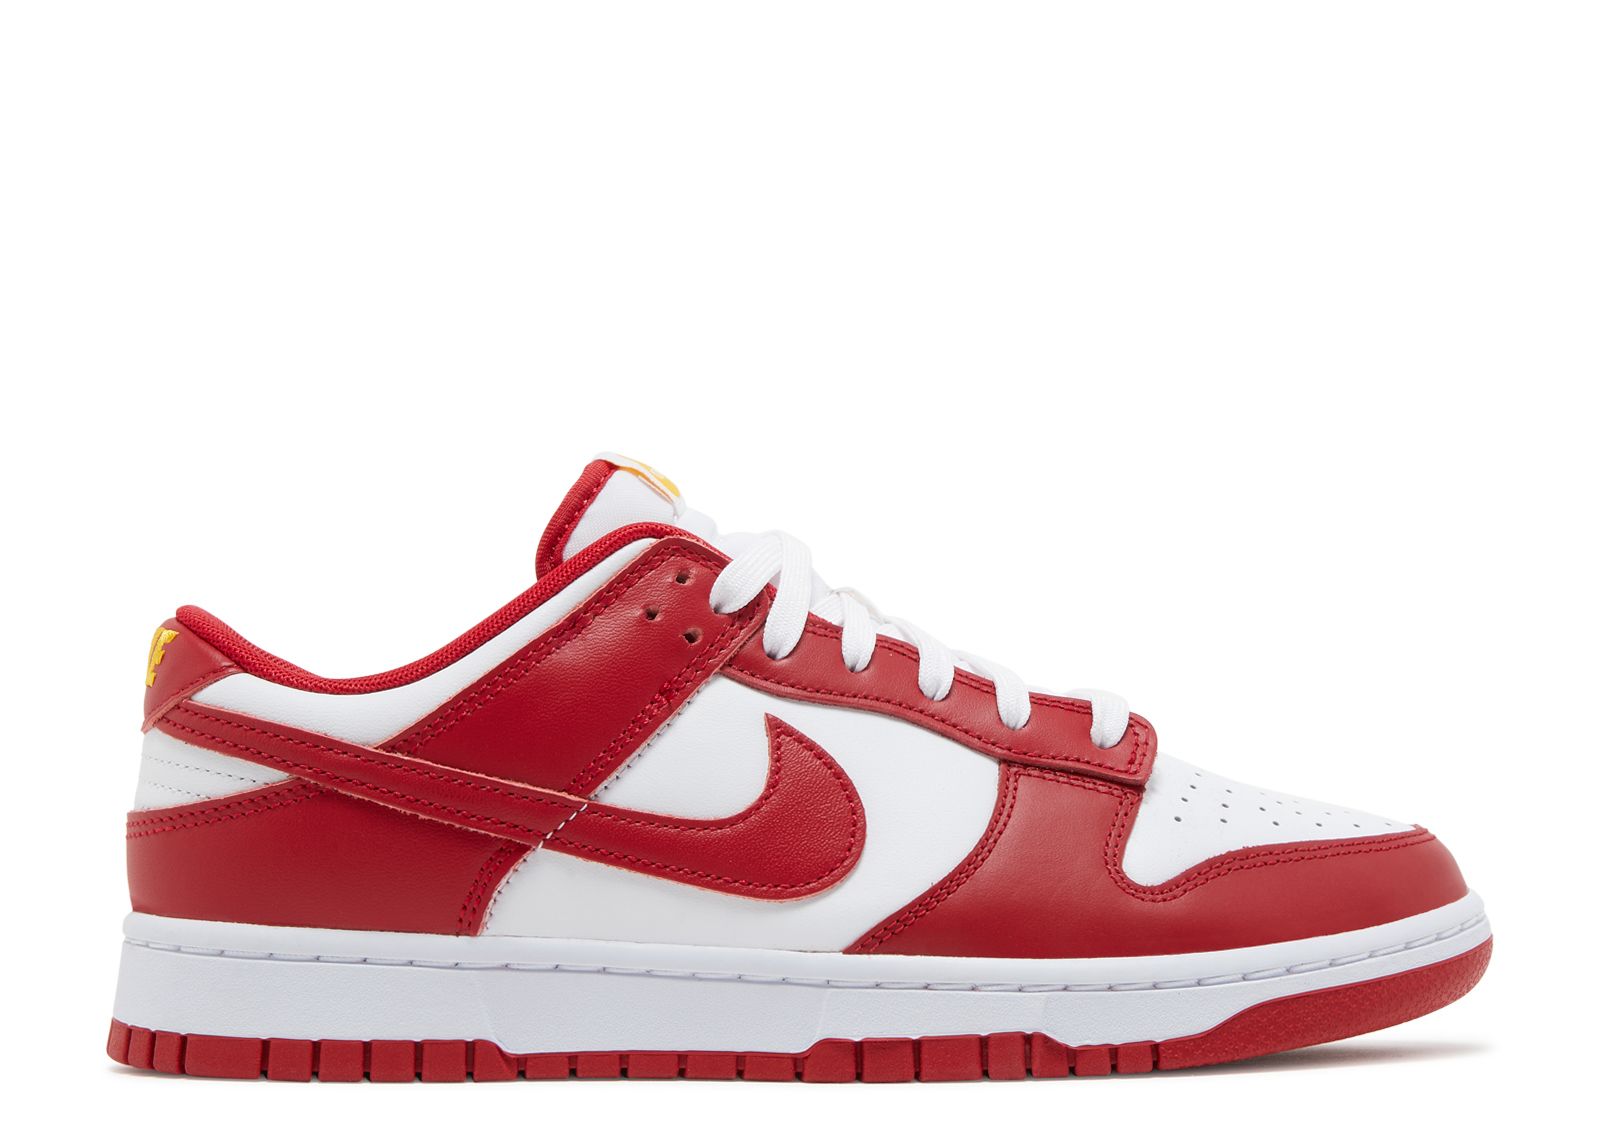 Dunk Low 'Gym Red' - Nike - DD1391 602 - gym red/white/university